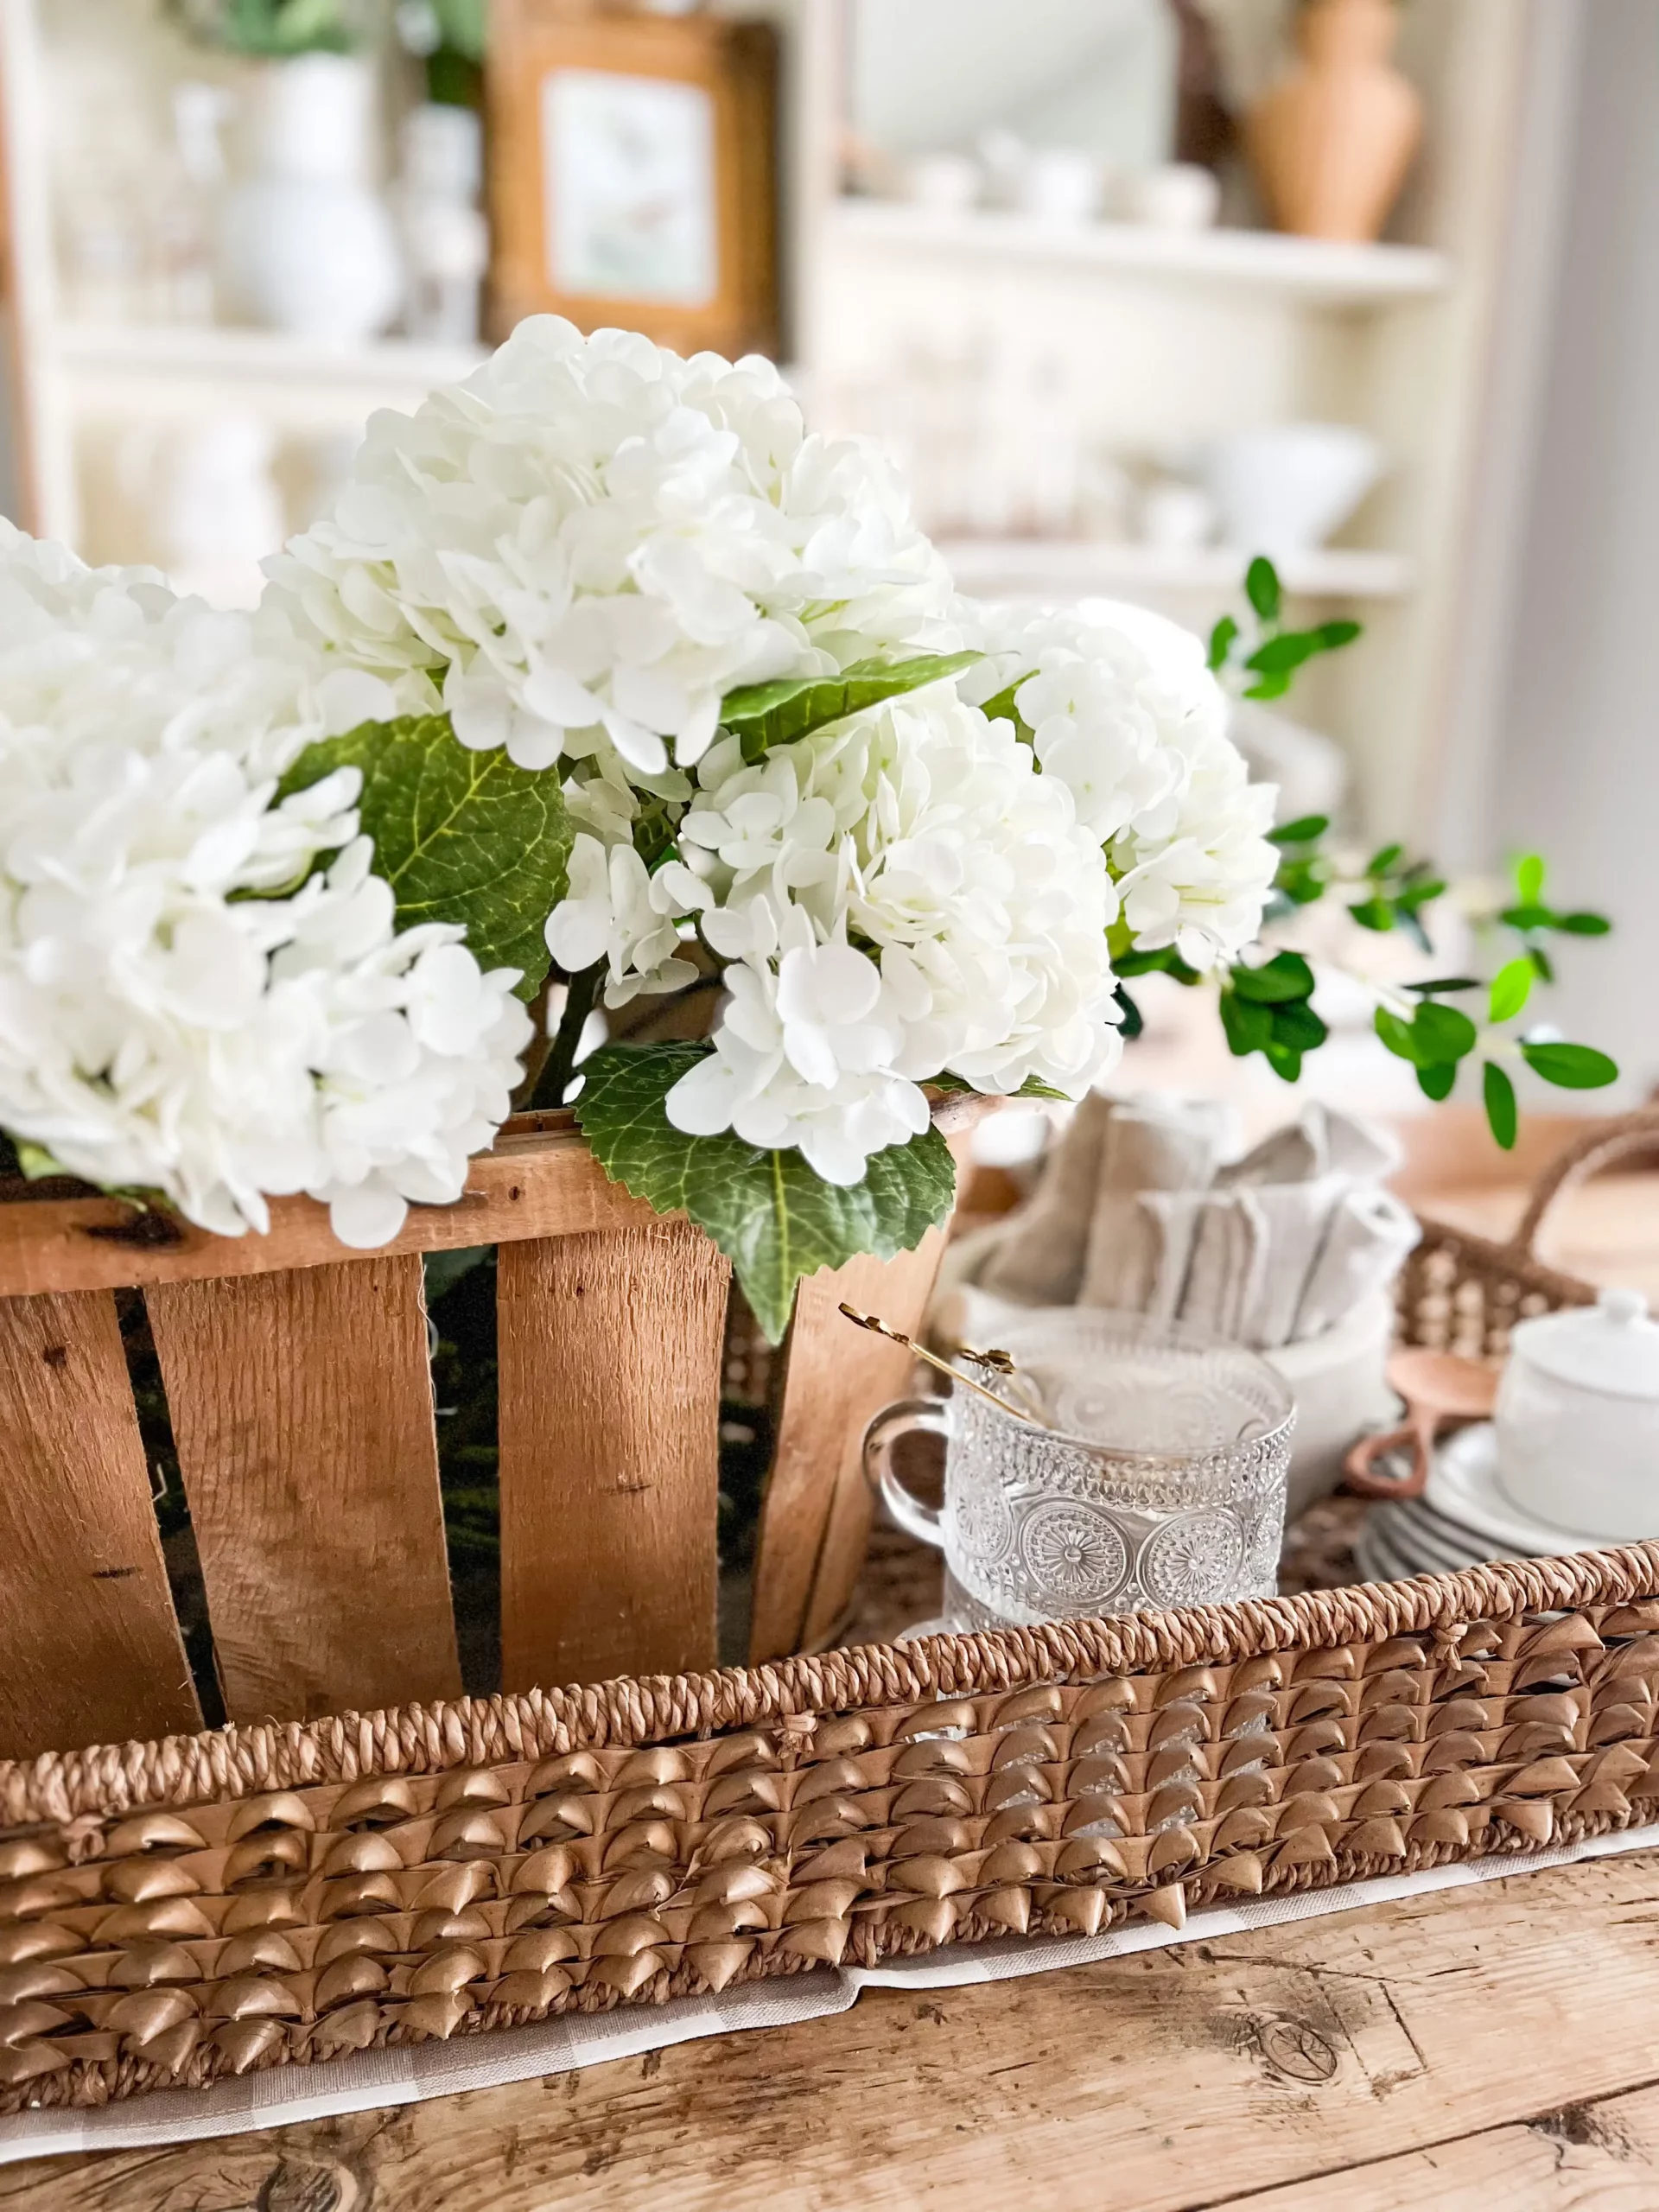 faux white hydrangeas in a wooden flower box as a centerpiece for the table